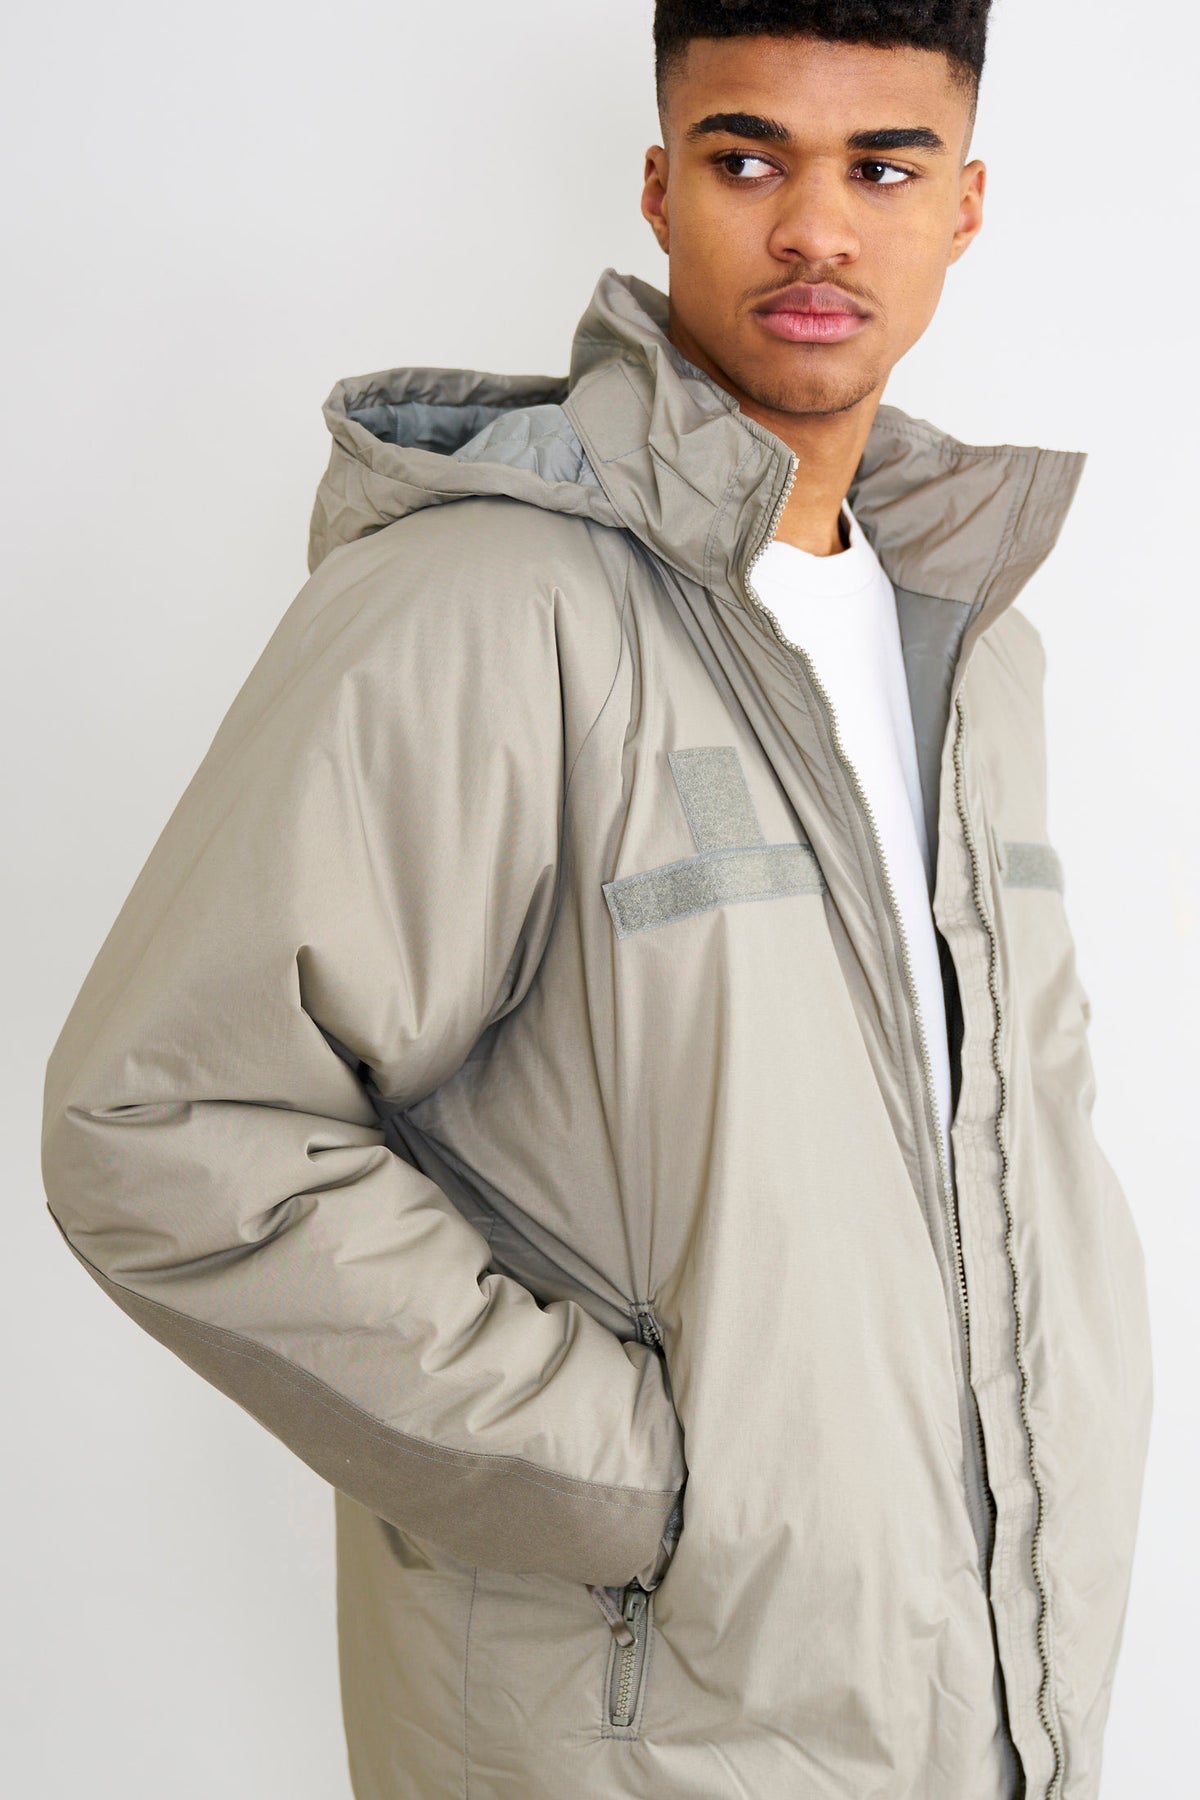 Wild Things ECWCS Gen III Level 7 Parka | AT EASE SHOP